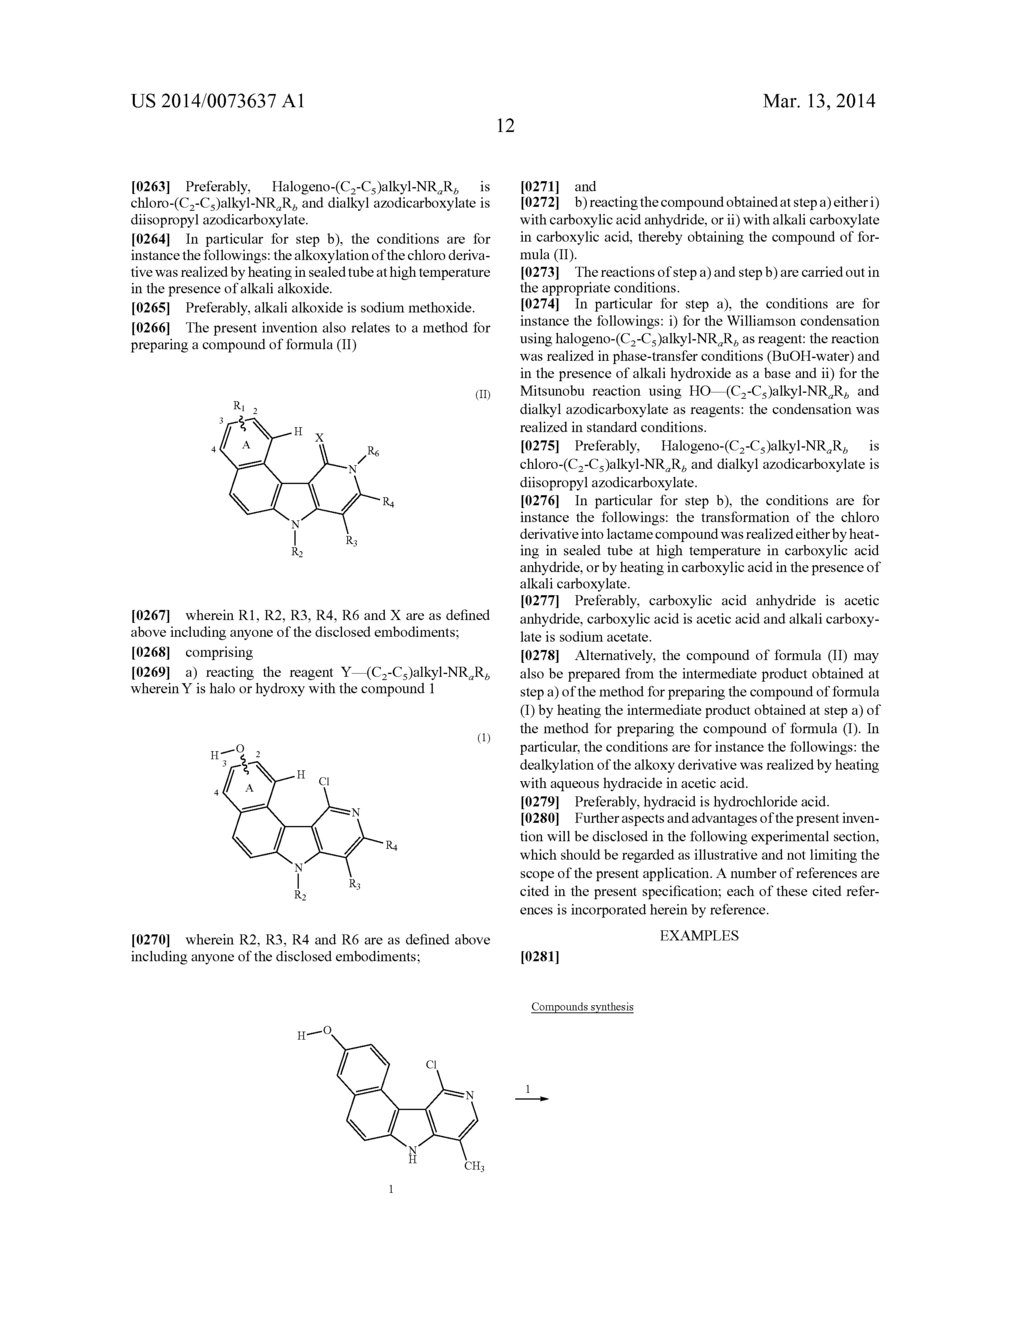 AMINO-SUBSTITUTED-ALKYLOXY-BENZO[E]PYRIDO[4,3-B]INDOLE DERIVATIVES AS NEW     POTENT KINASE INHIBITORS - diagram, schematic, and image 23